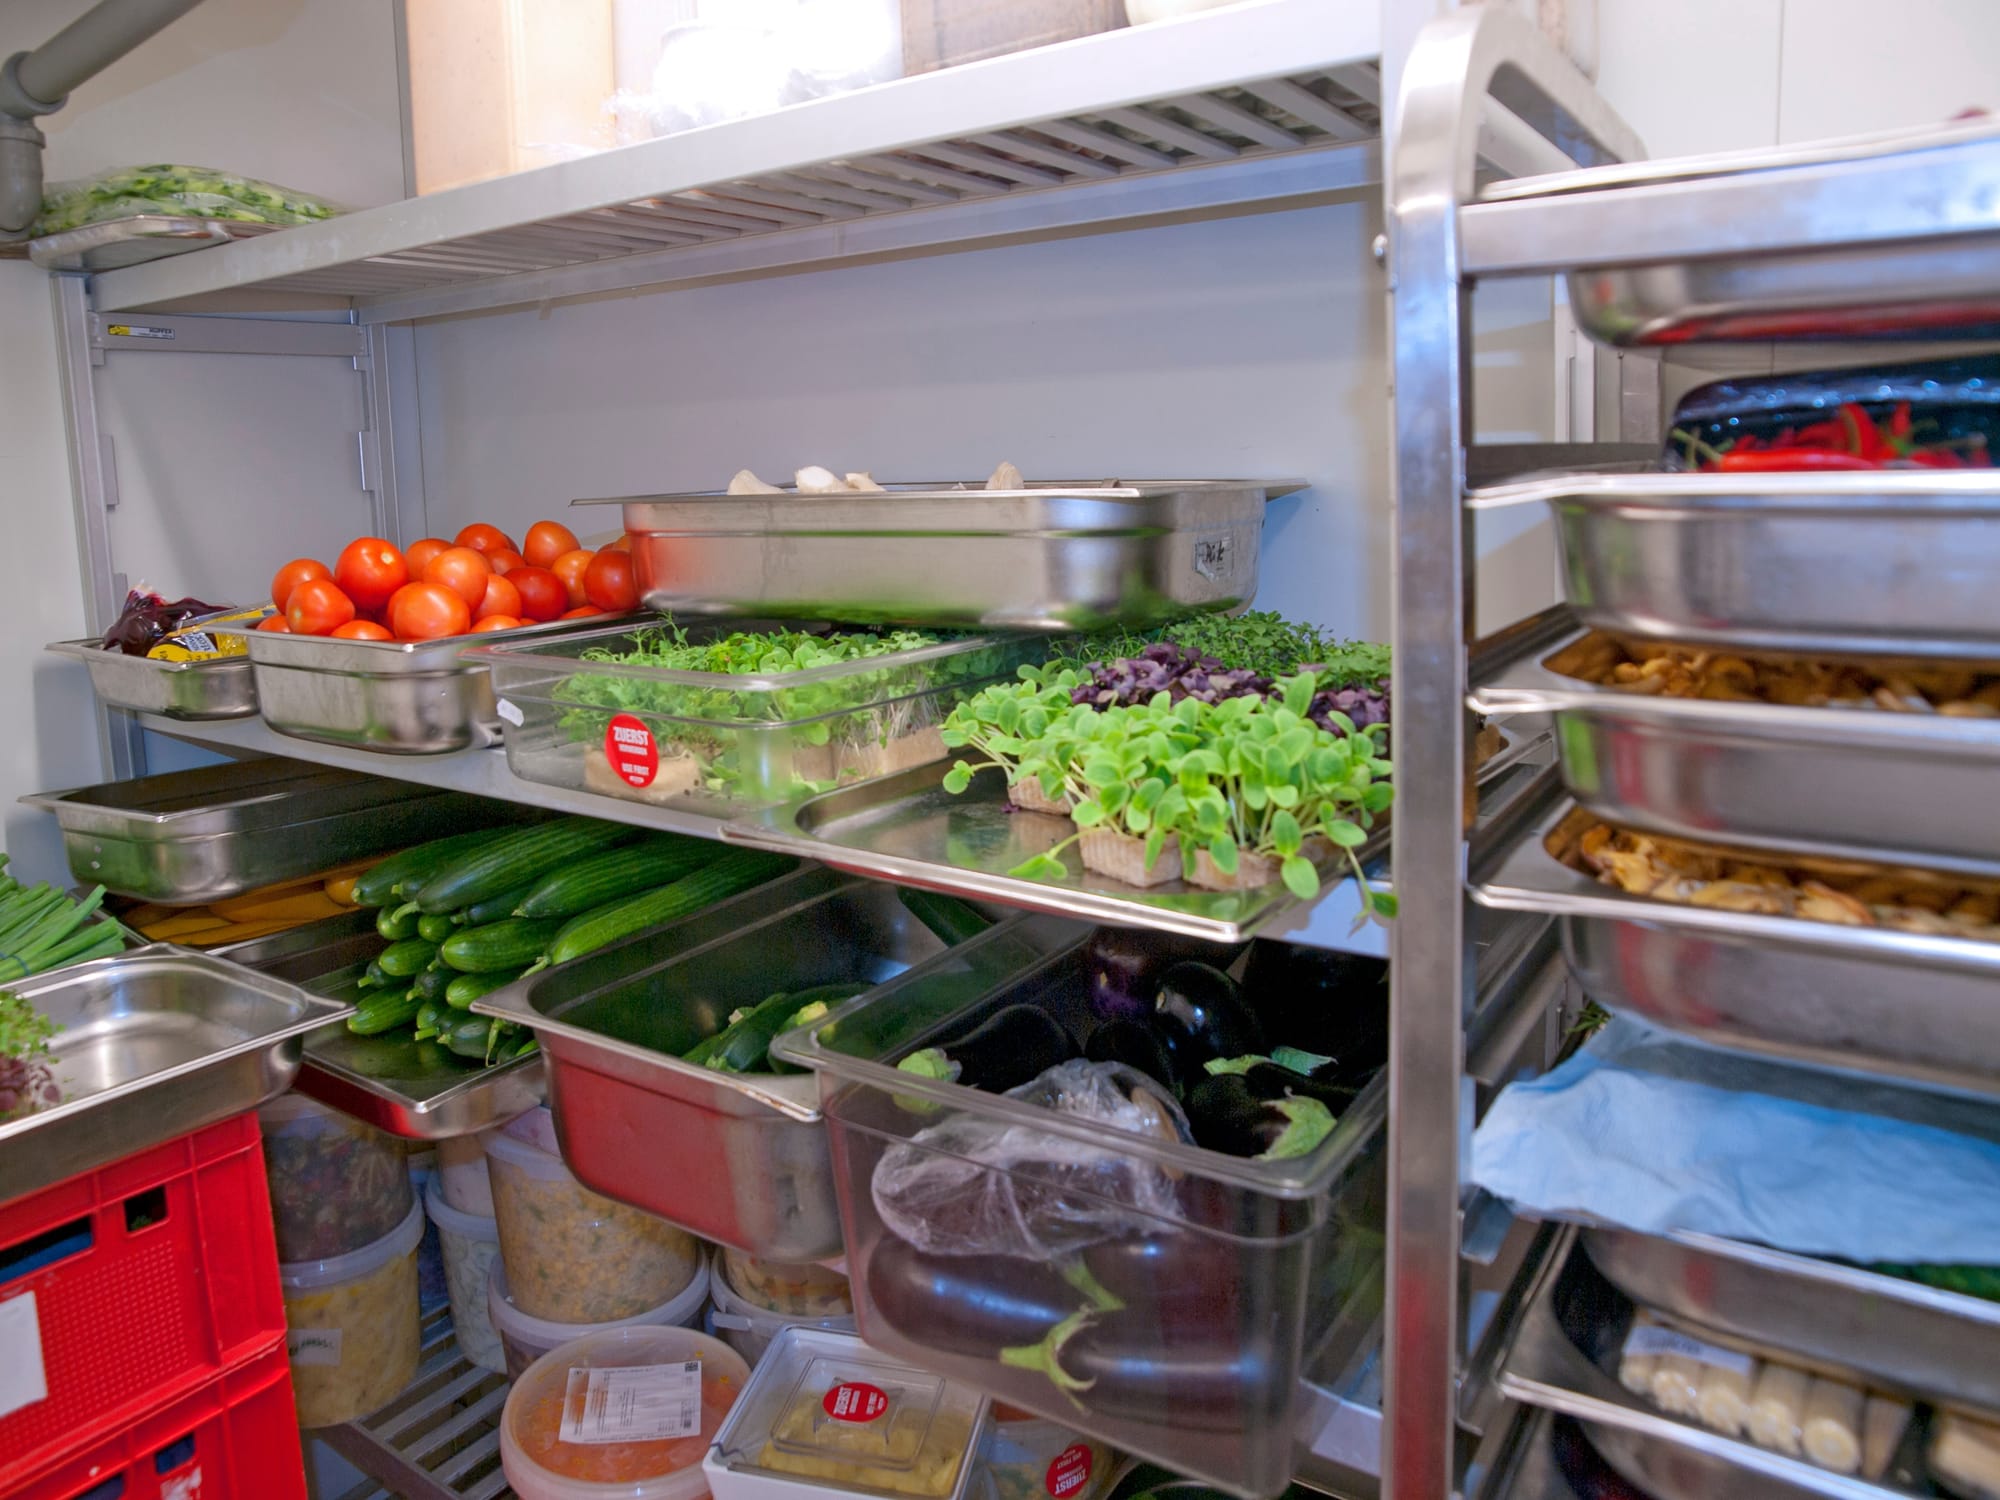 Restaurant shelving with containers of produce, sauces, and prepped entrees